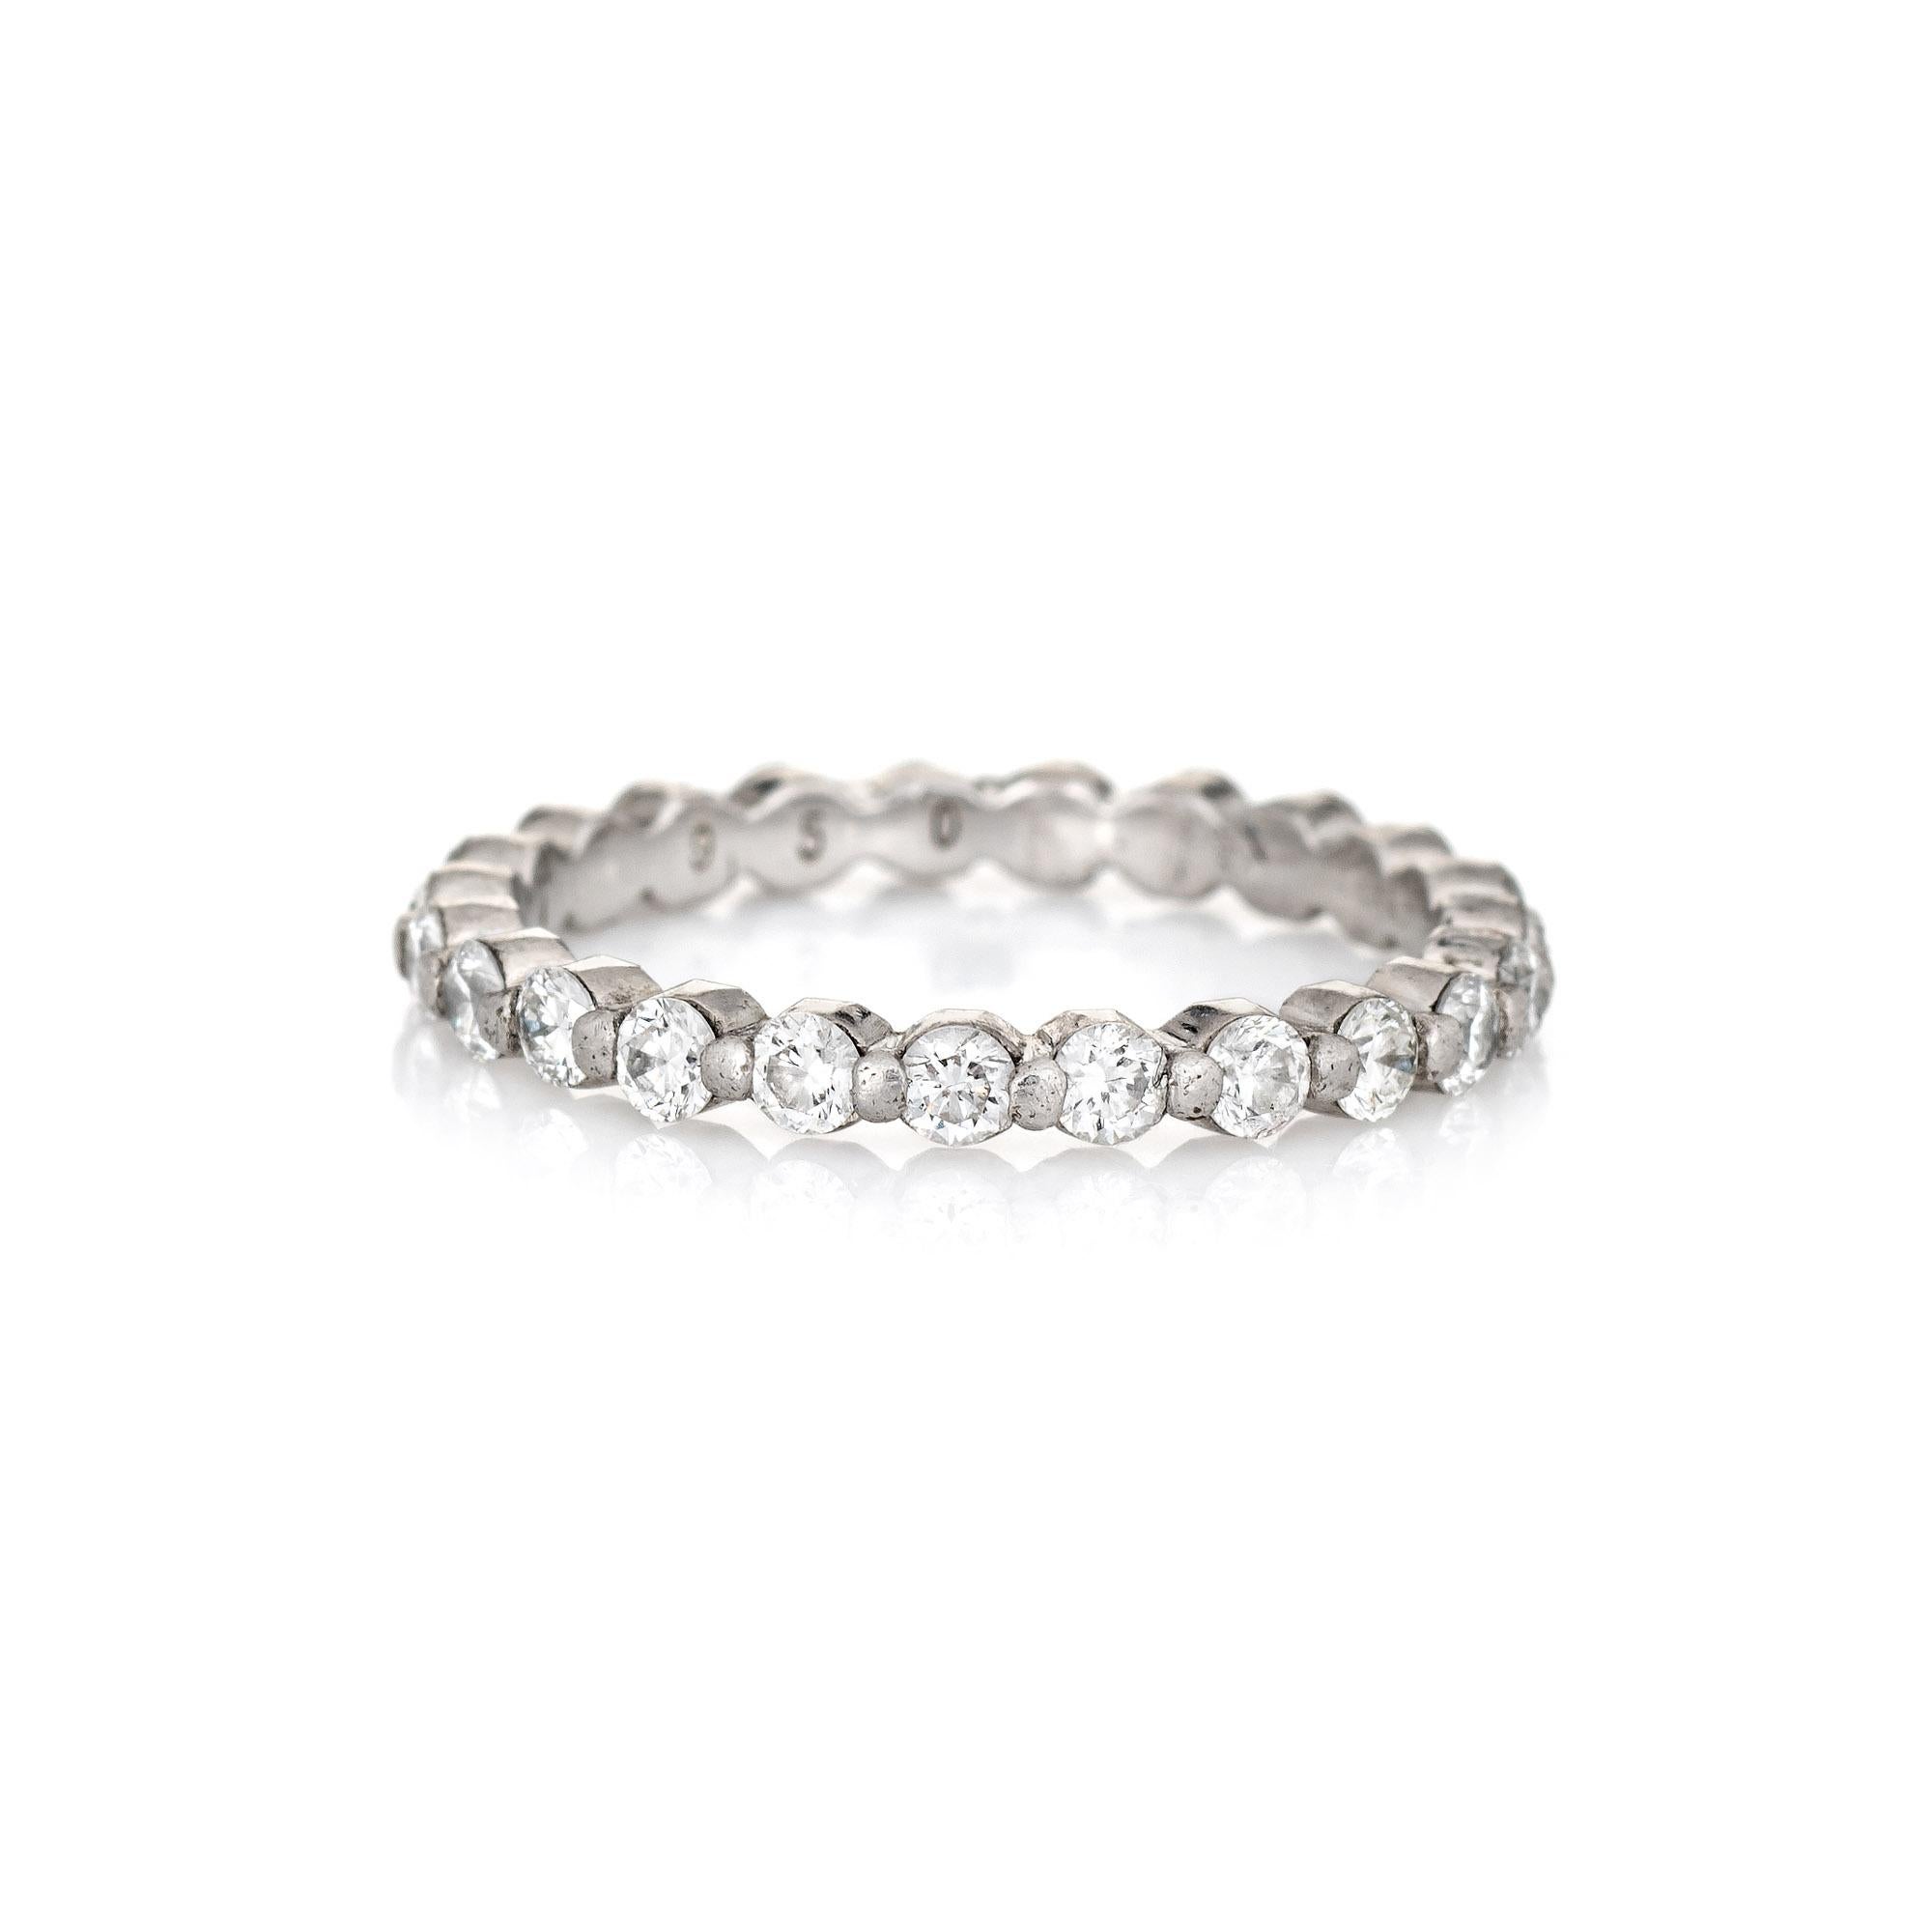 Stylish diamond eternity ring crafted in 950 platinum. 

23 round brilliant cut diamonds total an estimated 0.92 carats (estimated at H-I color and SI1-2 clarity). 

With diamonds set around the entire band the full eternity ring is great worn alone